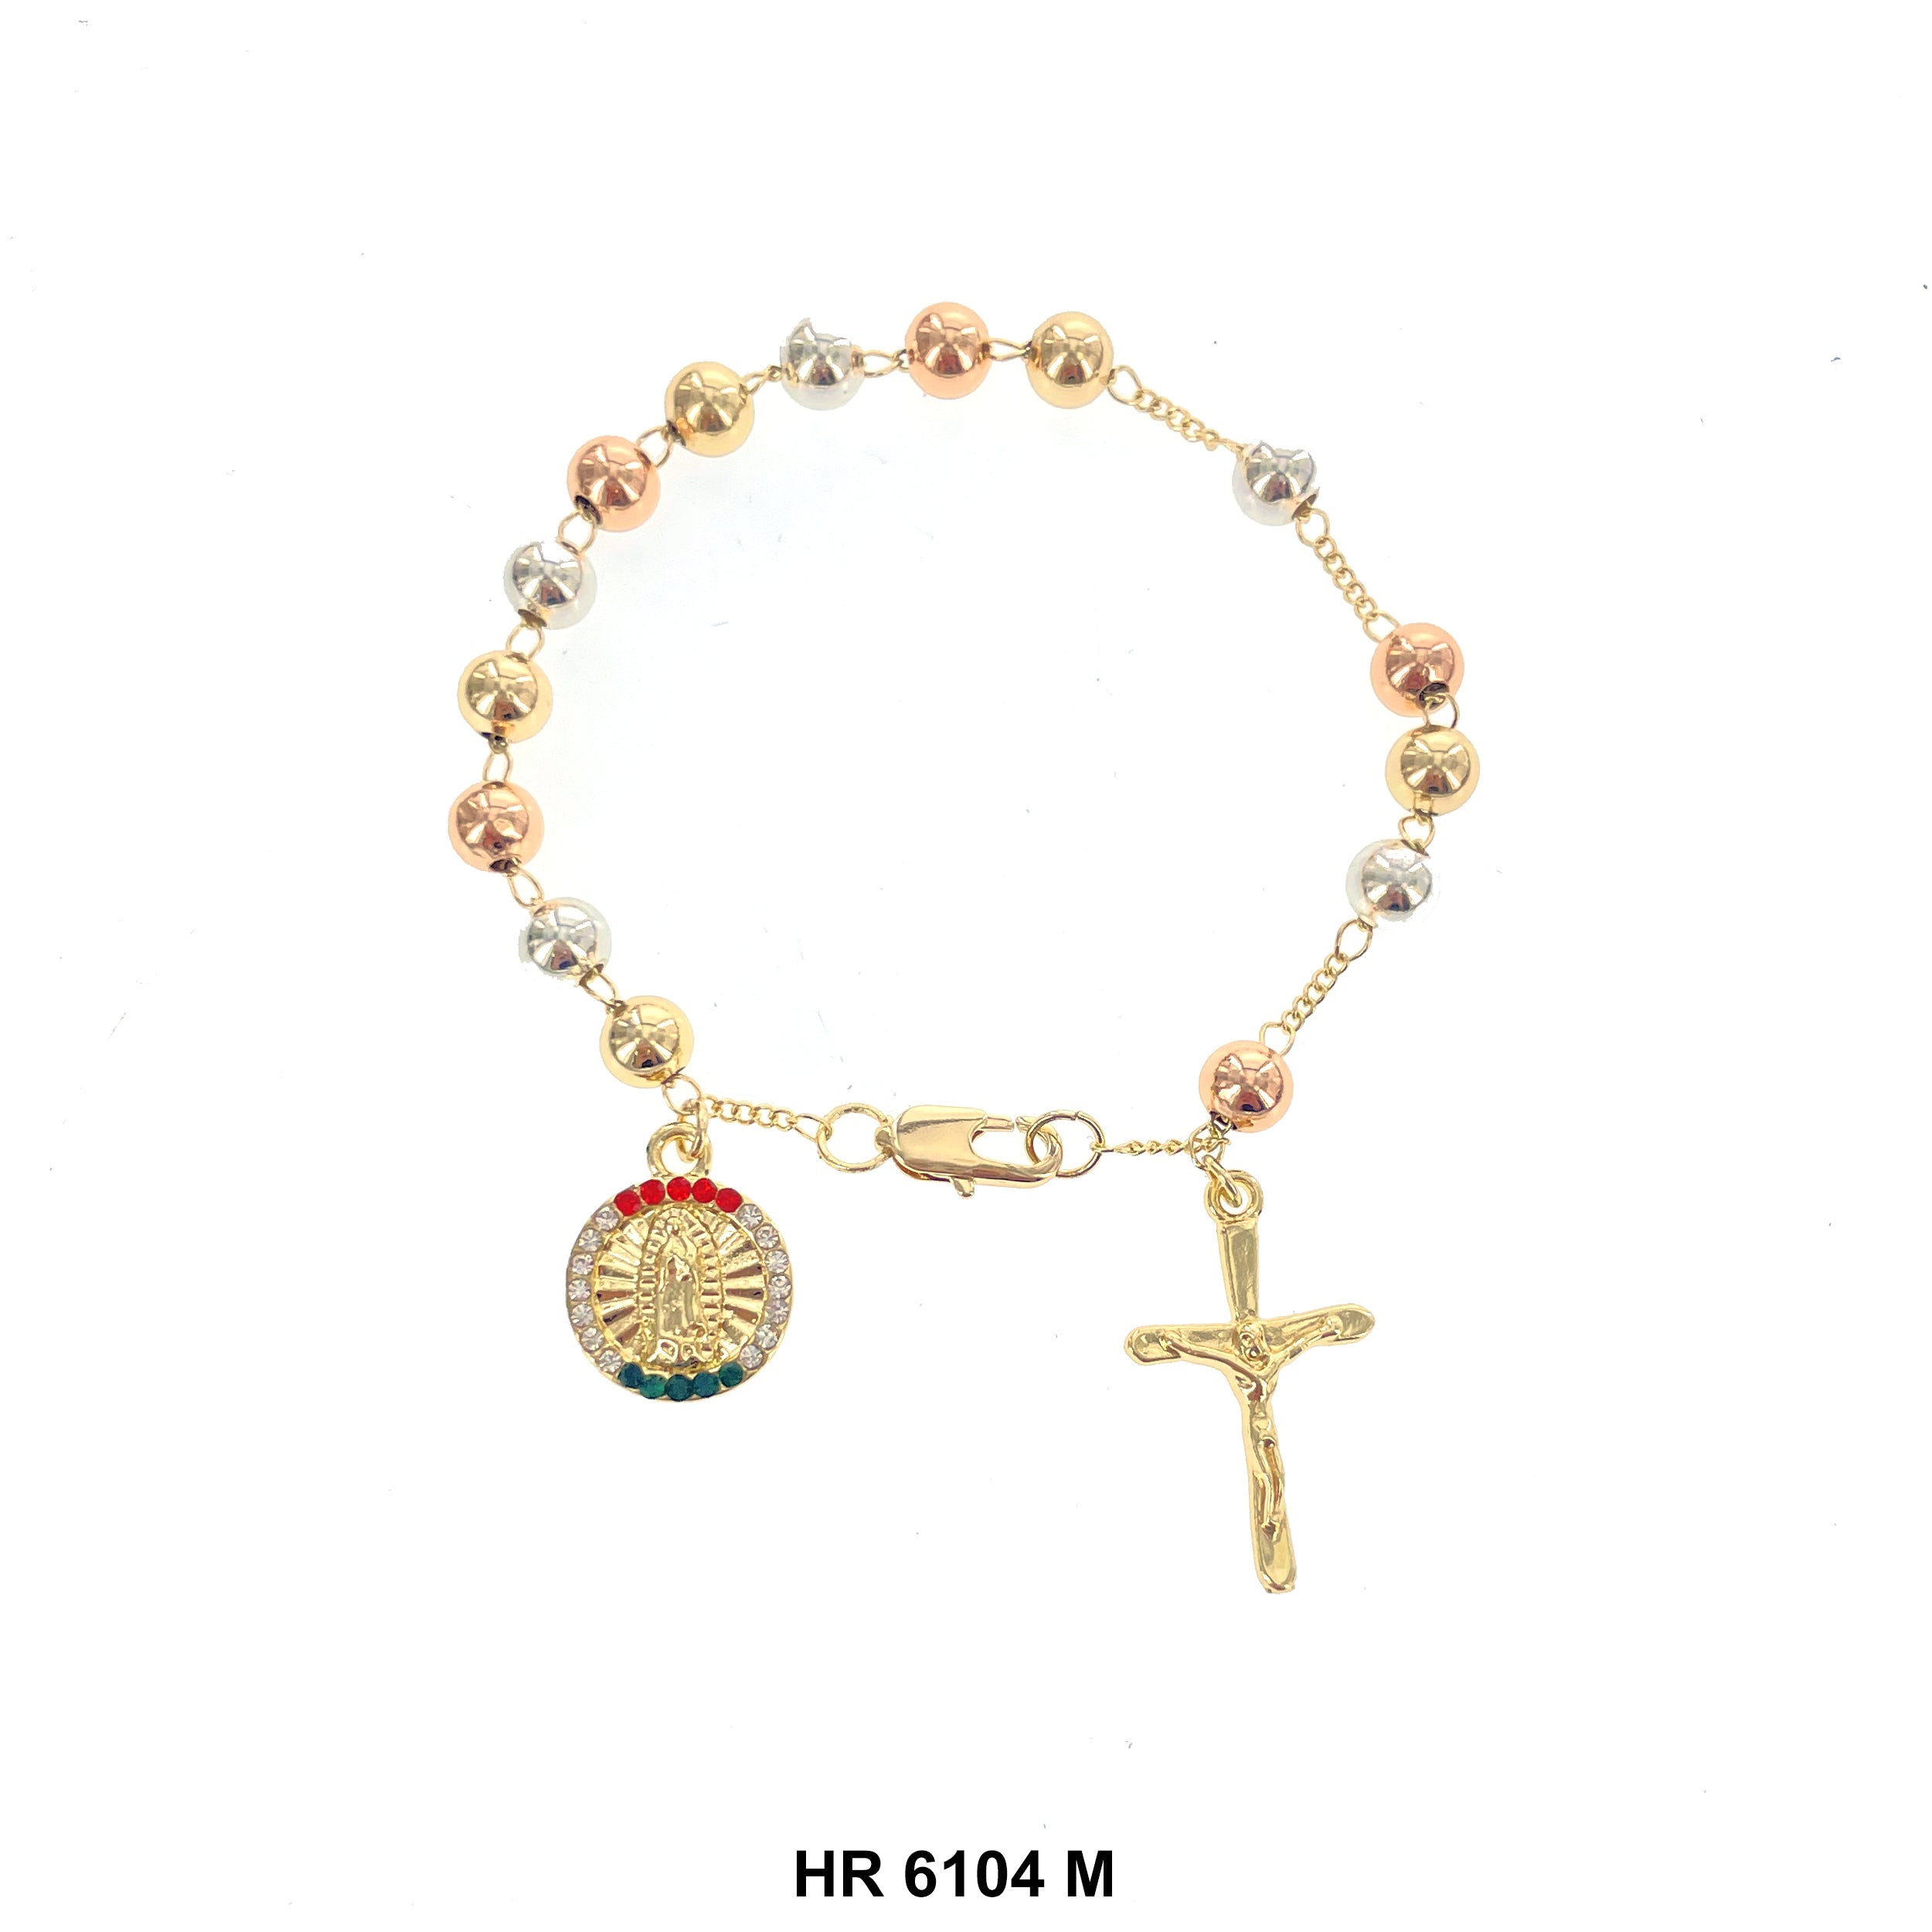 6 MM Hand Rosary Guadalupe HR 6104 M